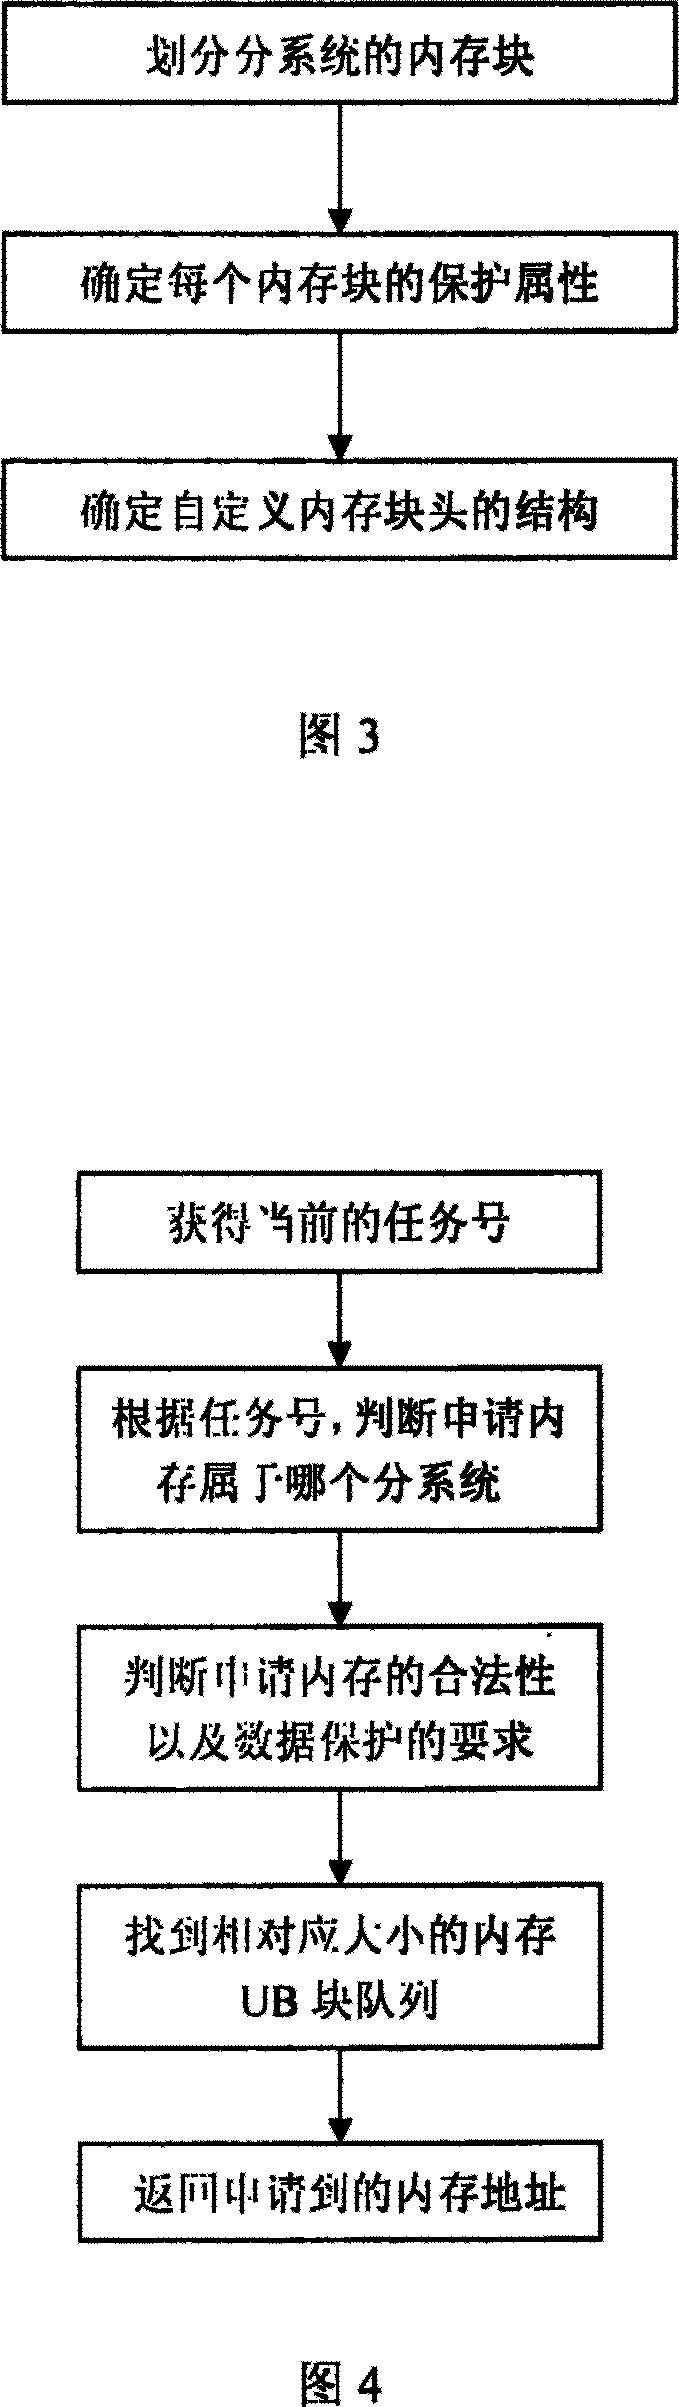 Virtual internal storage allocating and managing method of subsystem in communication system